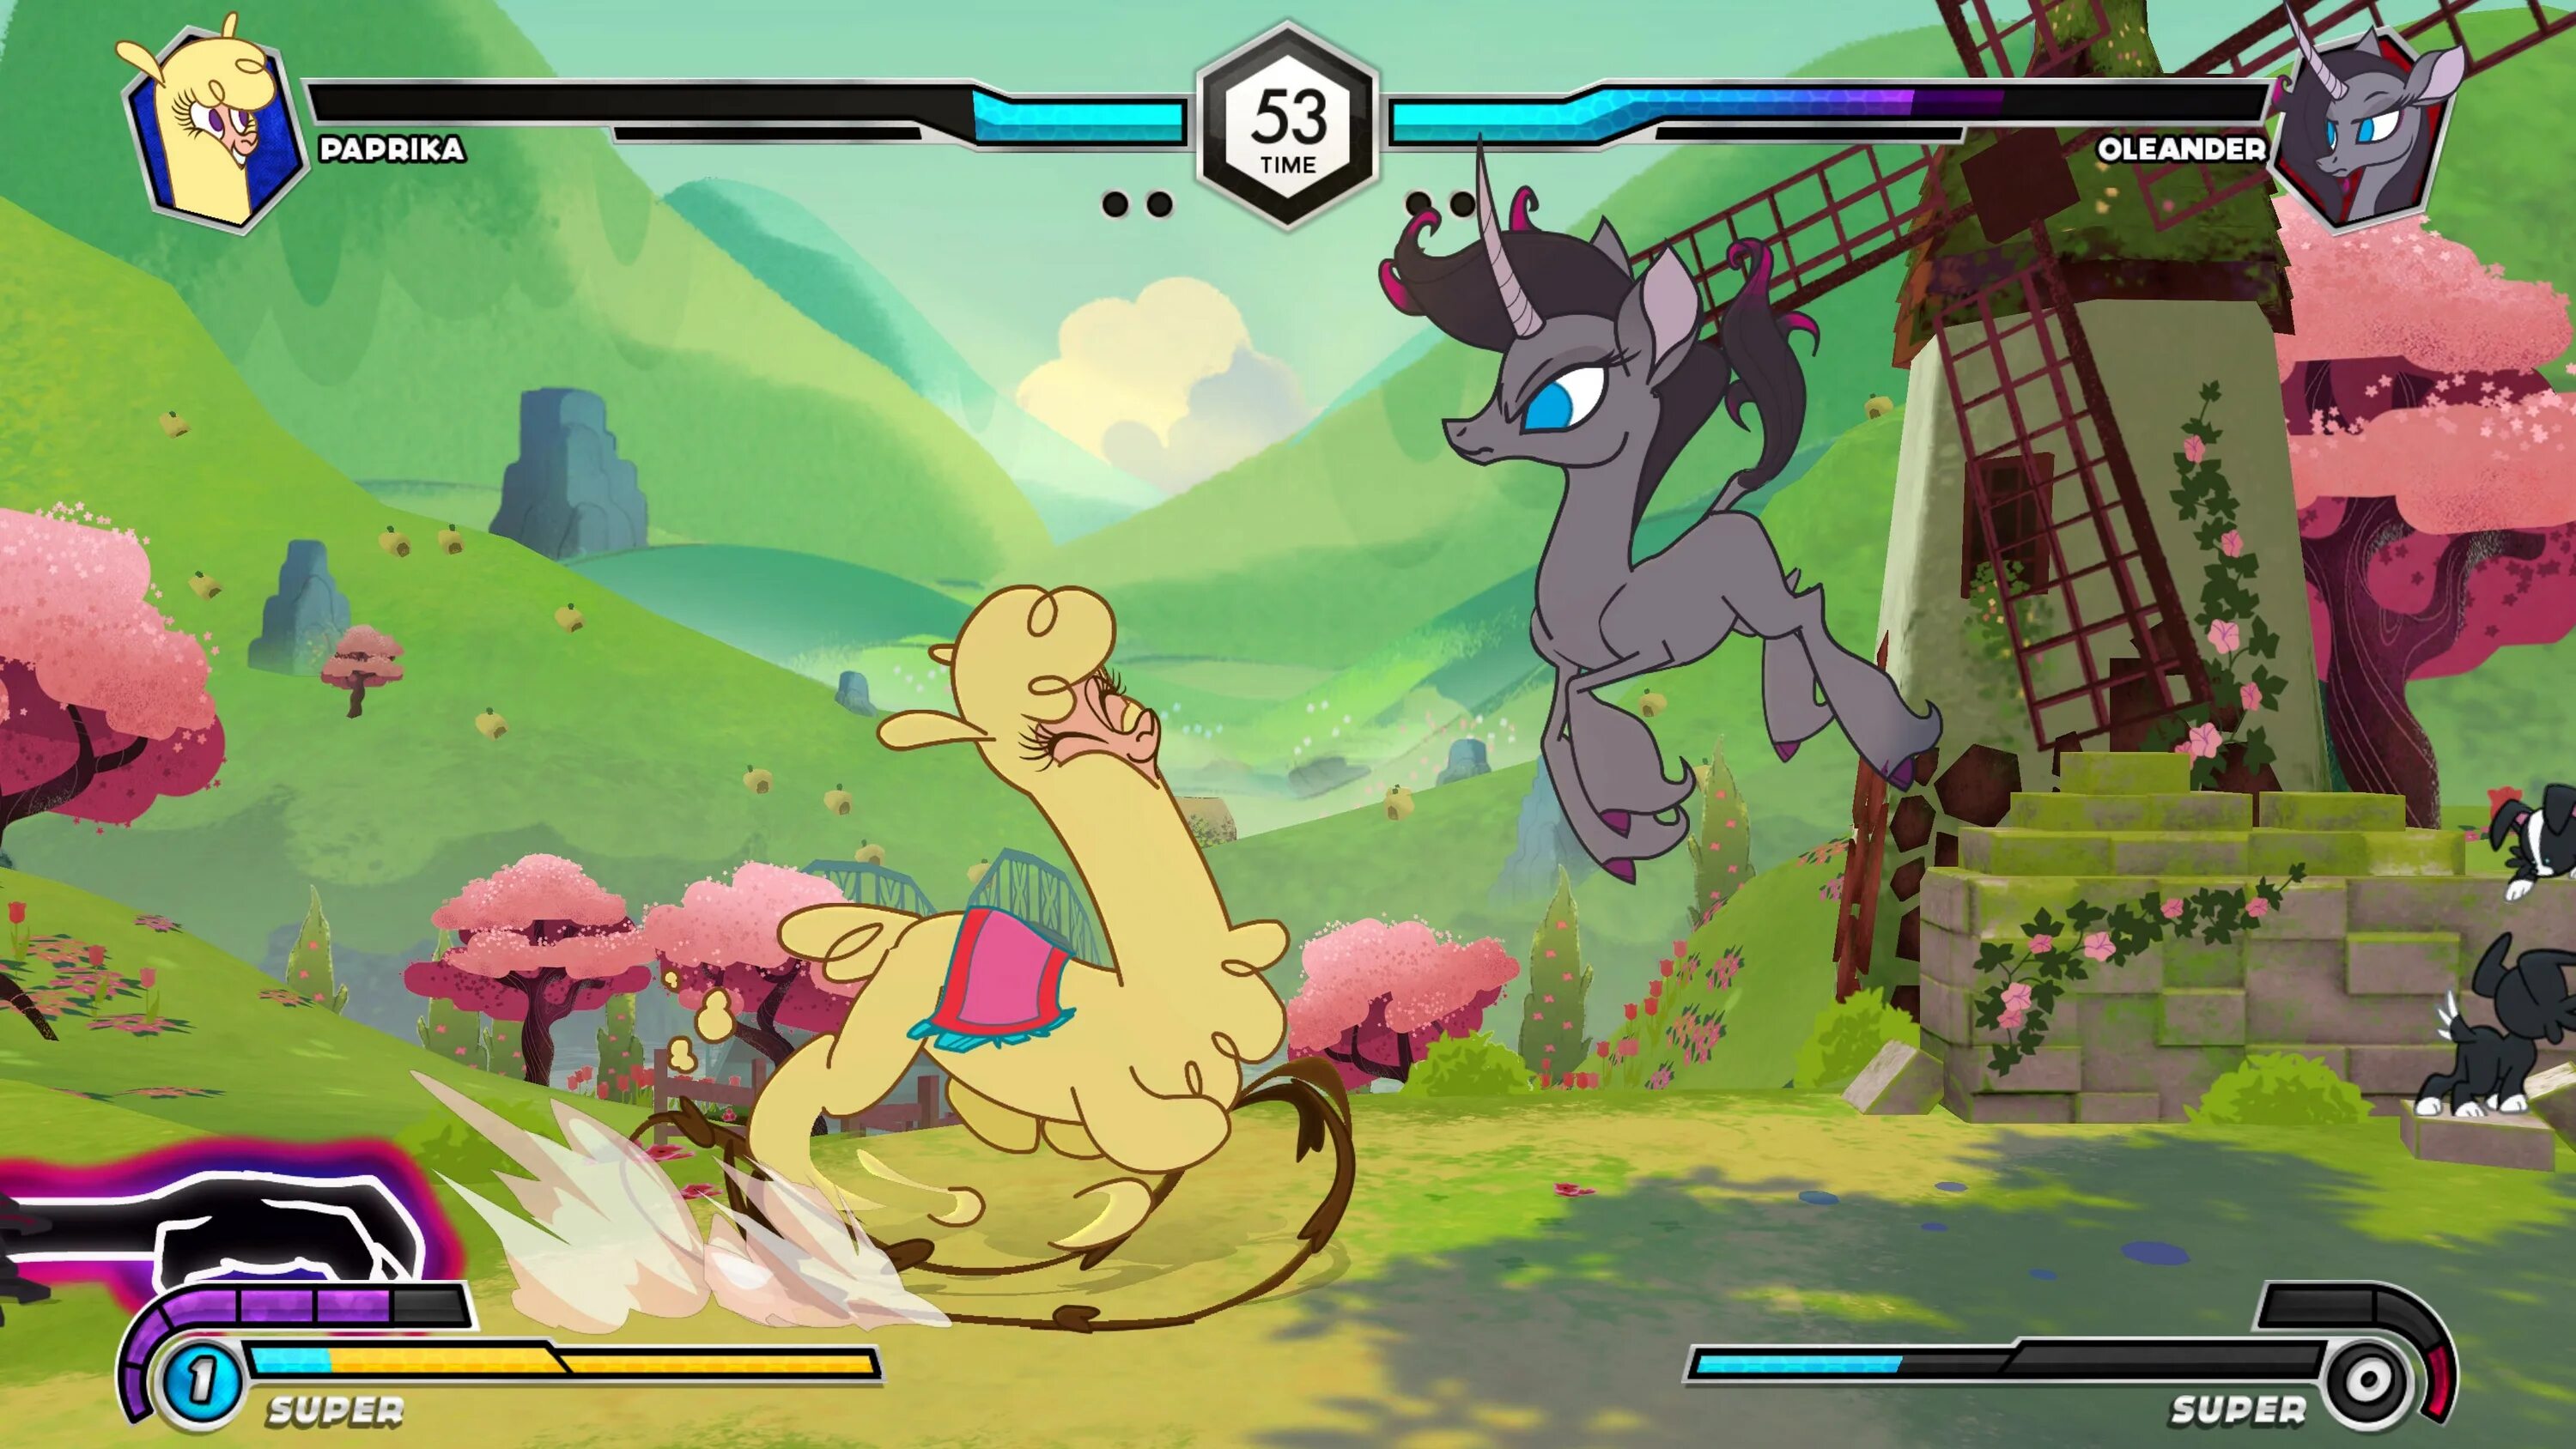 Them fighting herds. Thems Fightin Herds ps4. Them Fighting Herds персонажи. Themes Fighting Herds. Them's Fightin' Herds.